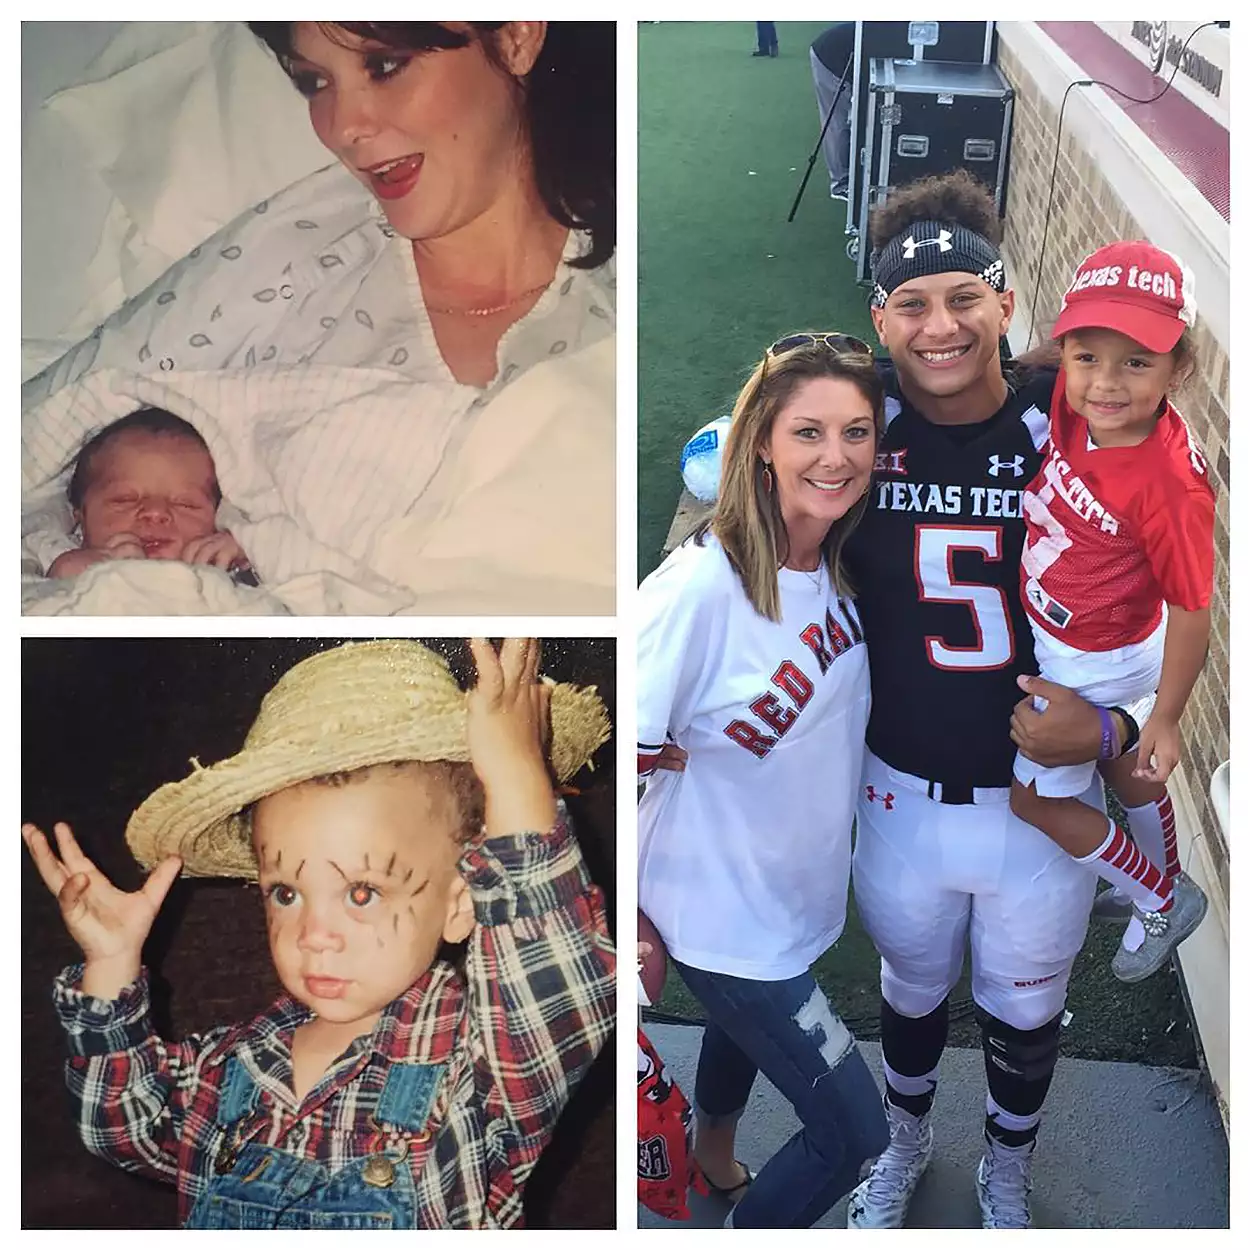 Randi Mahomes Reflects on Being a 'Young' Mom to Patrick: ”˜It Made Me Grow Up in a Great Way”